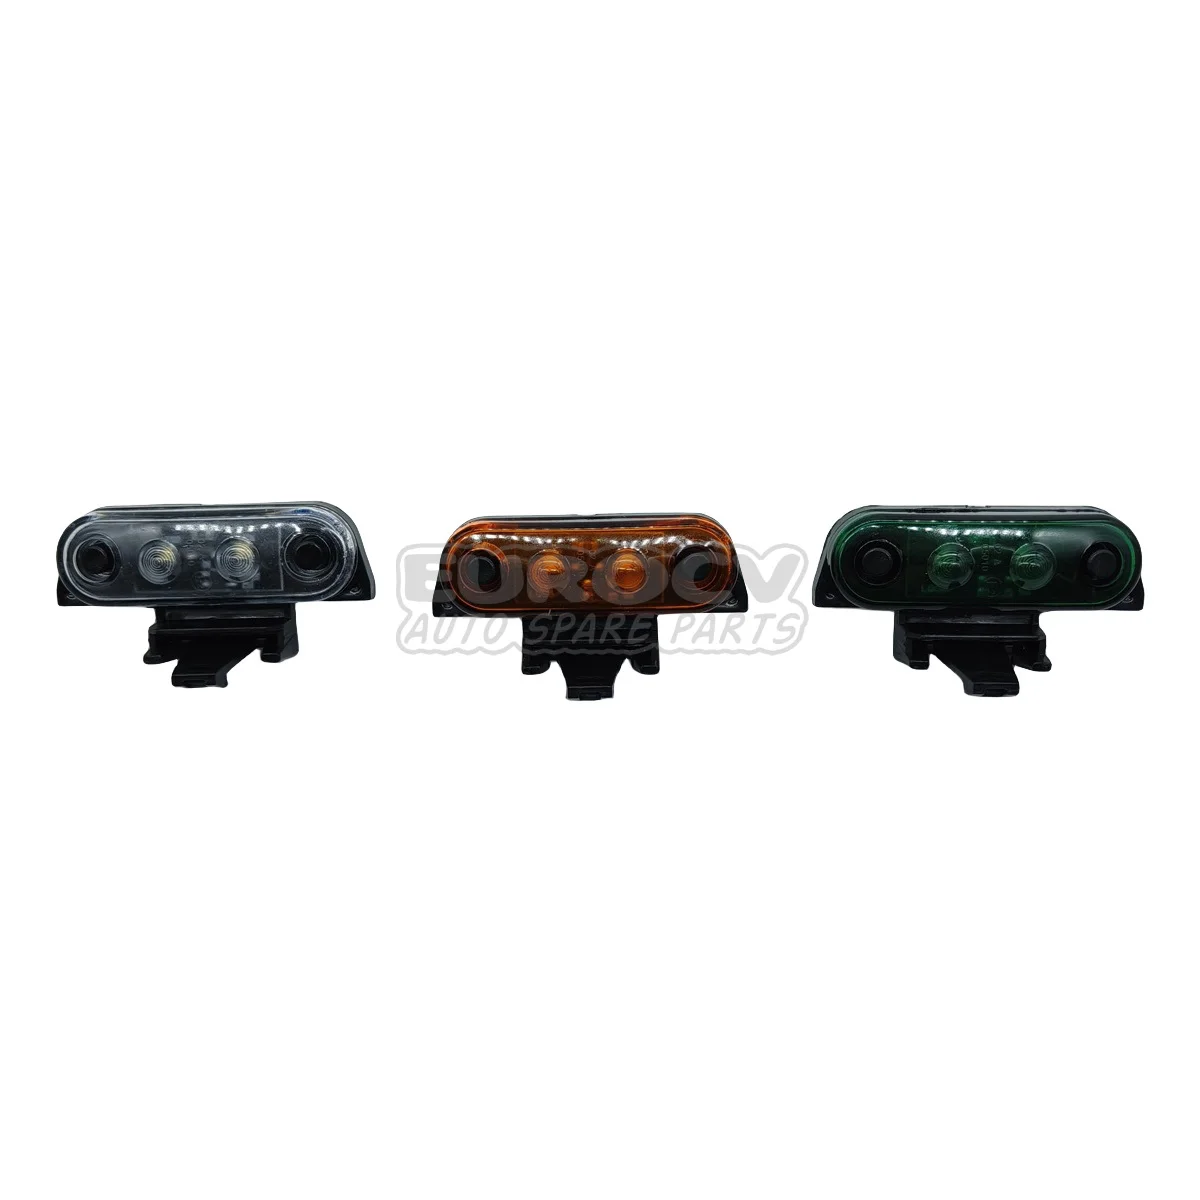 

Spare Parts for Volvo Trucks VOE 82116545 + 21087346 + 21087347 Cab Position Lamp Kit 10 Pcs in a Box